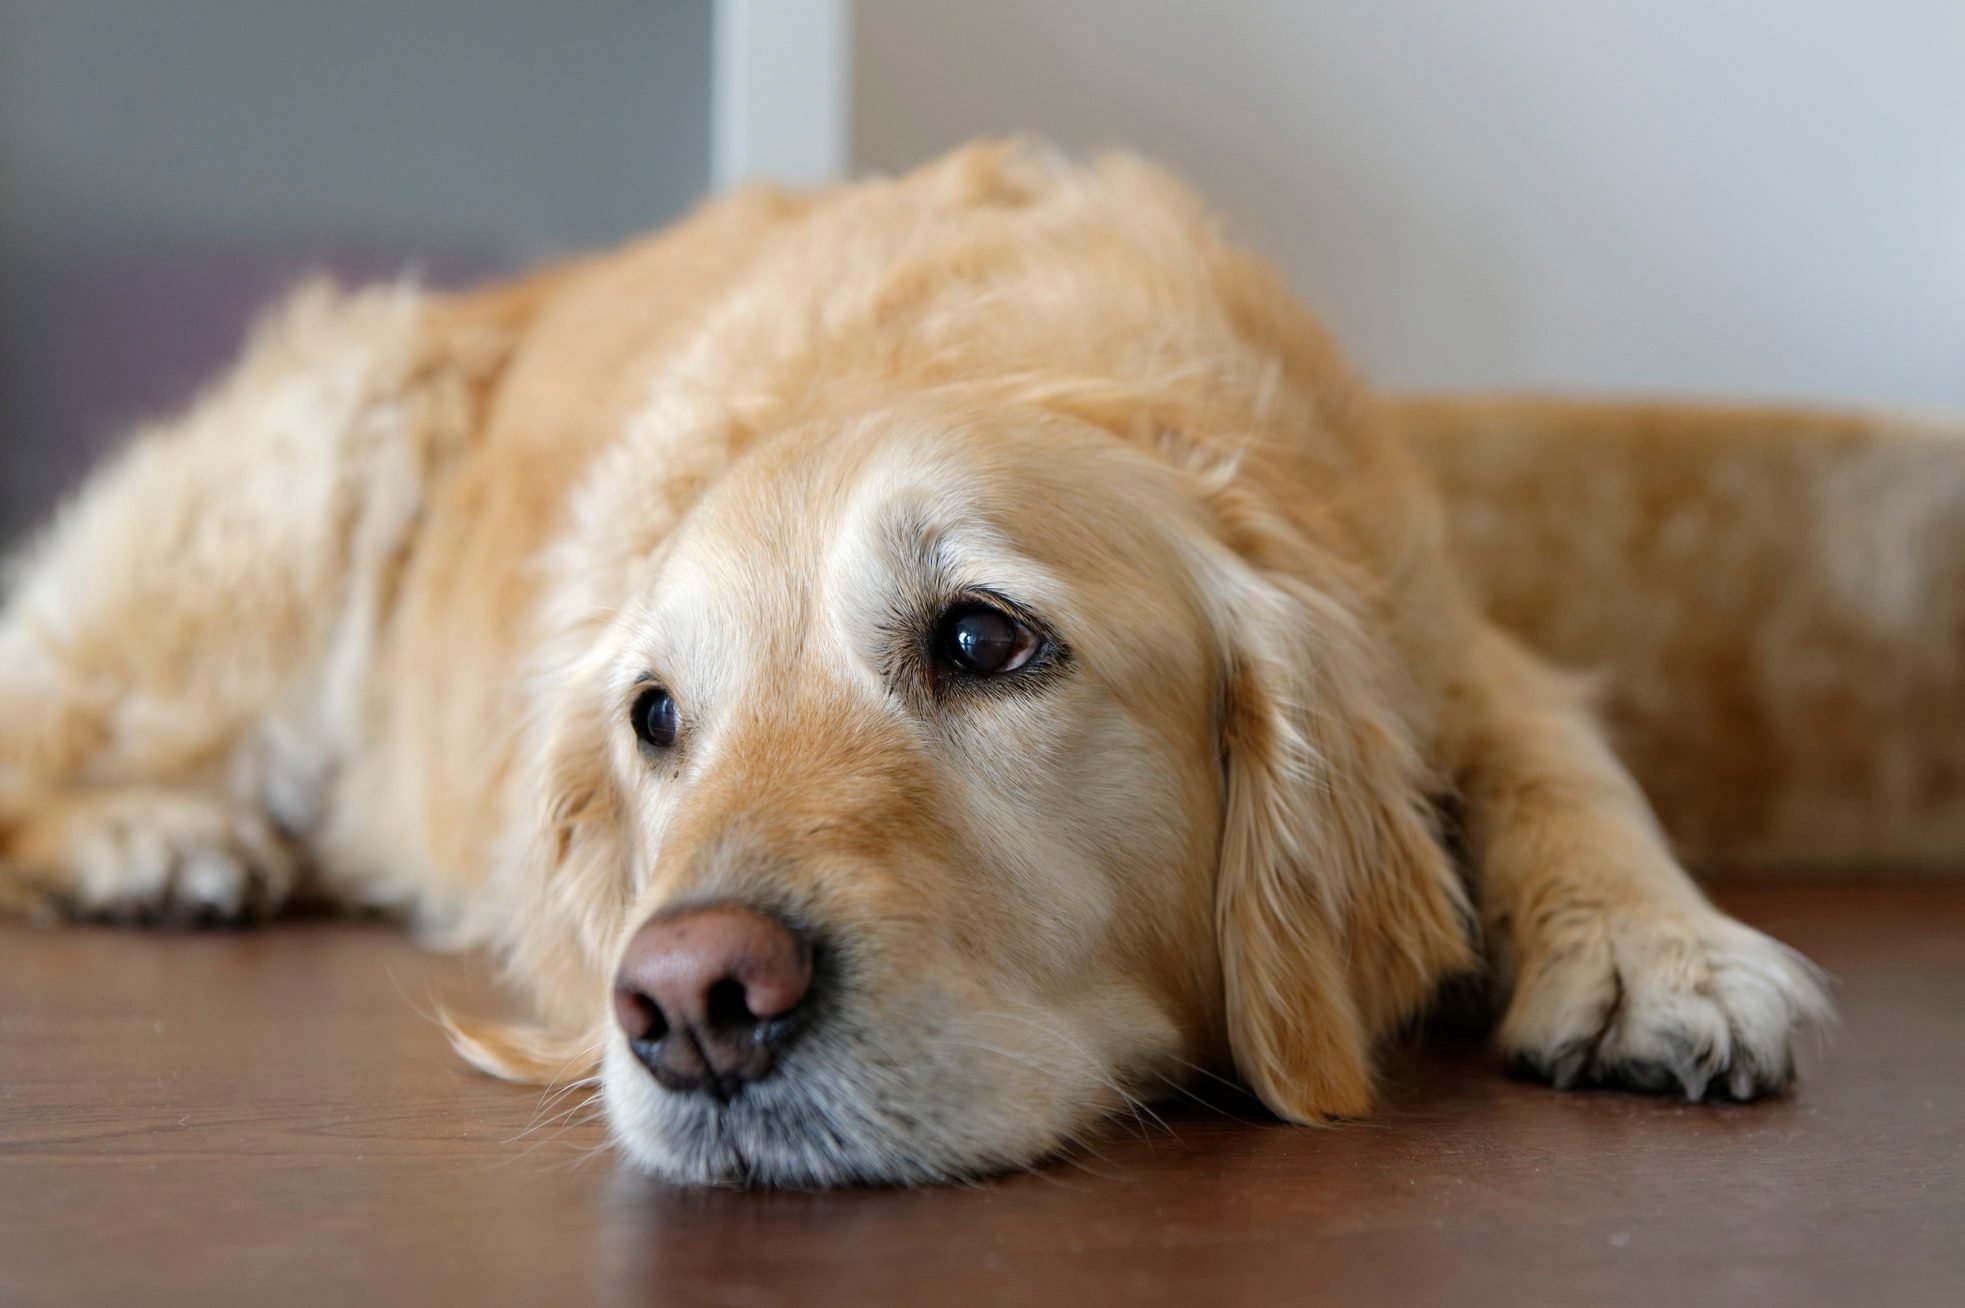 Do dogs know when you cry?